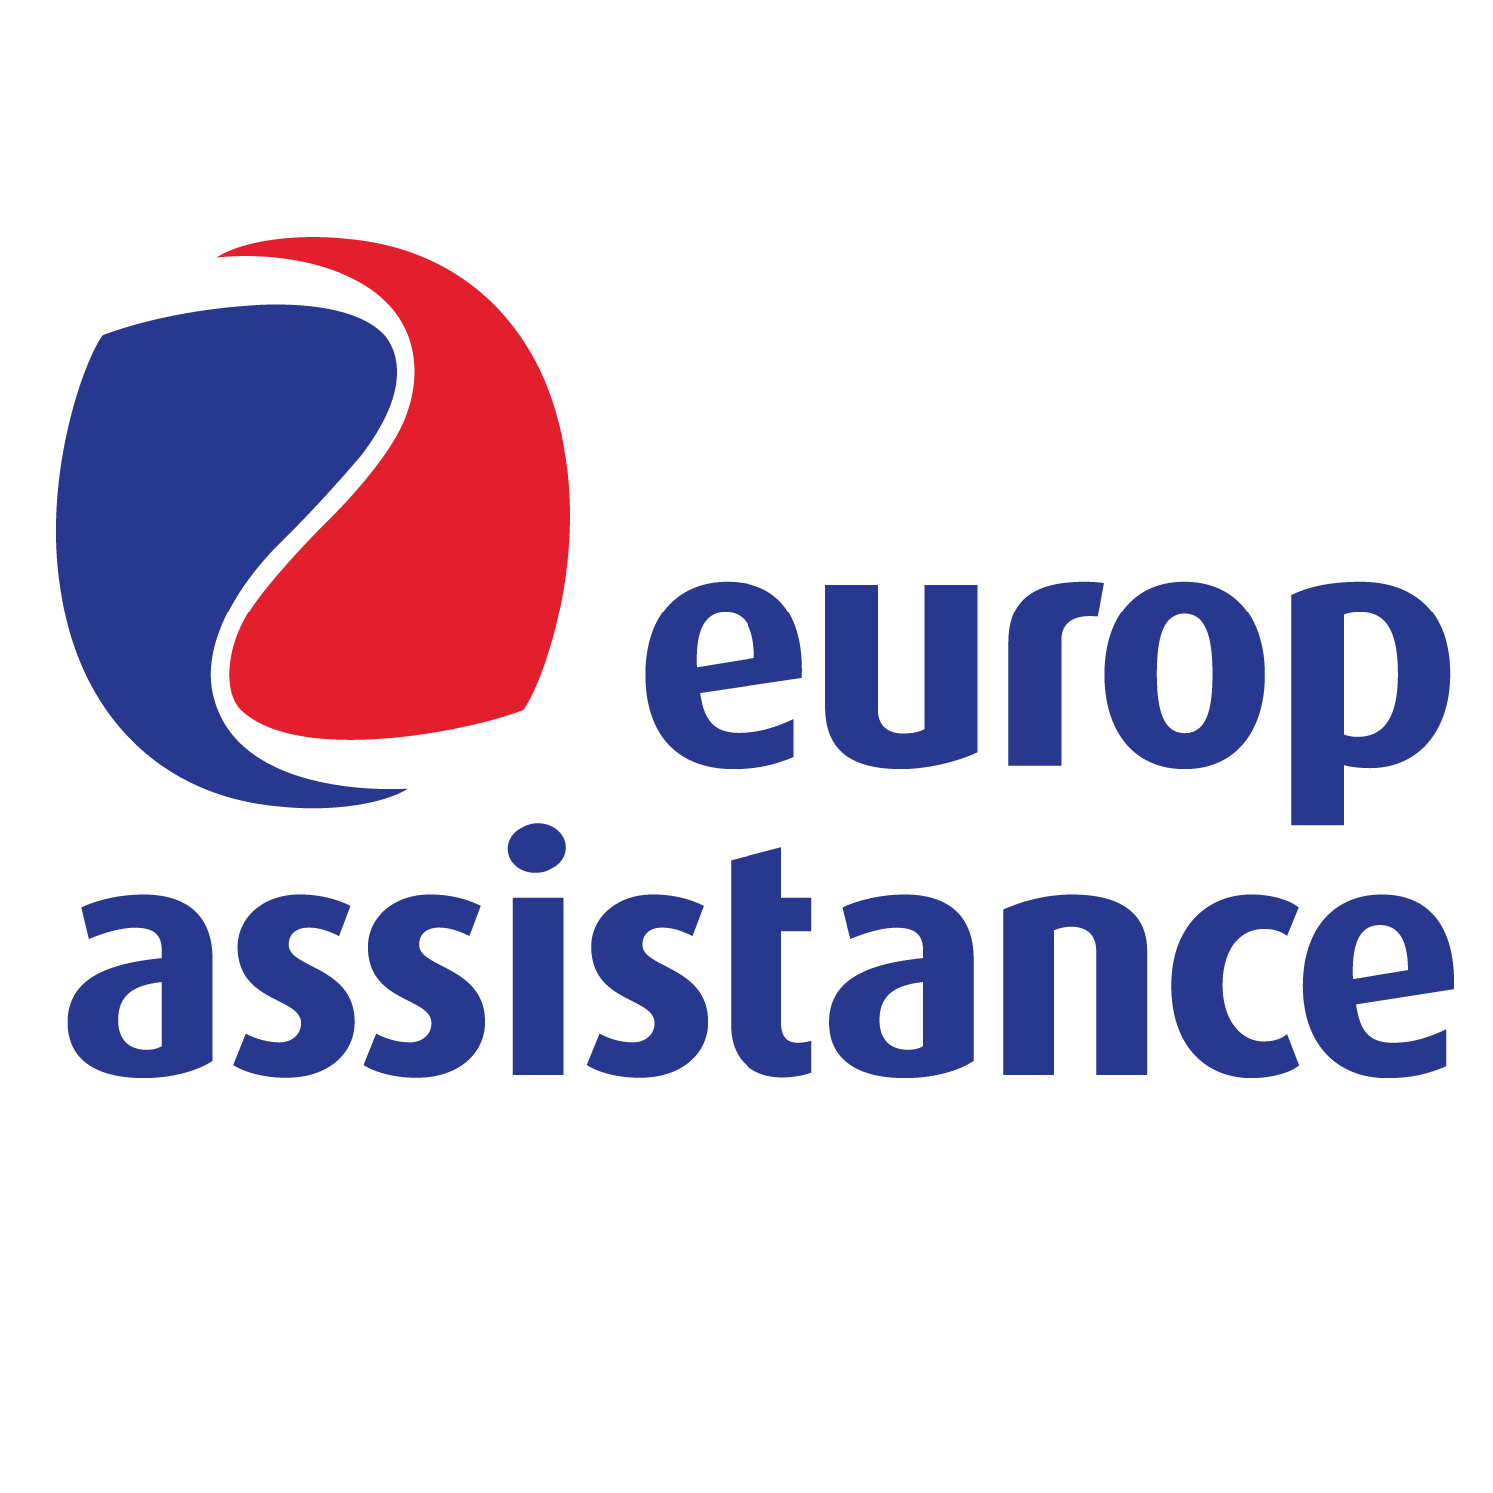 europe assistance